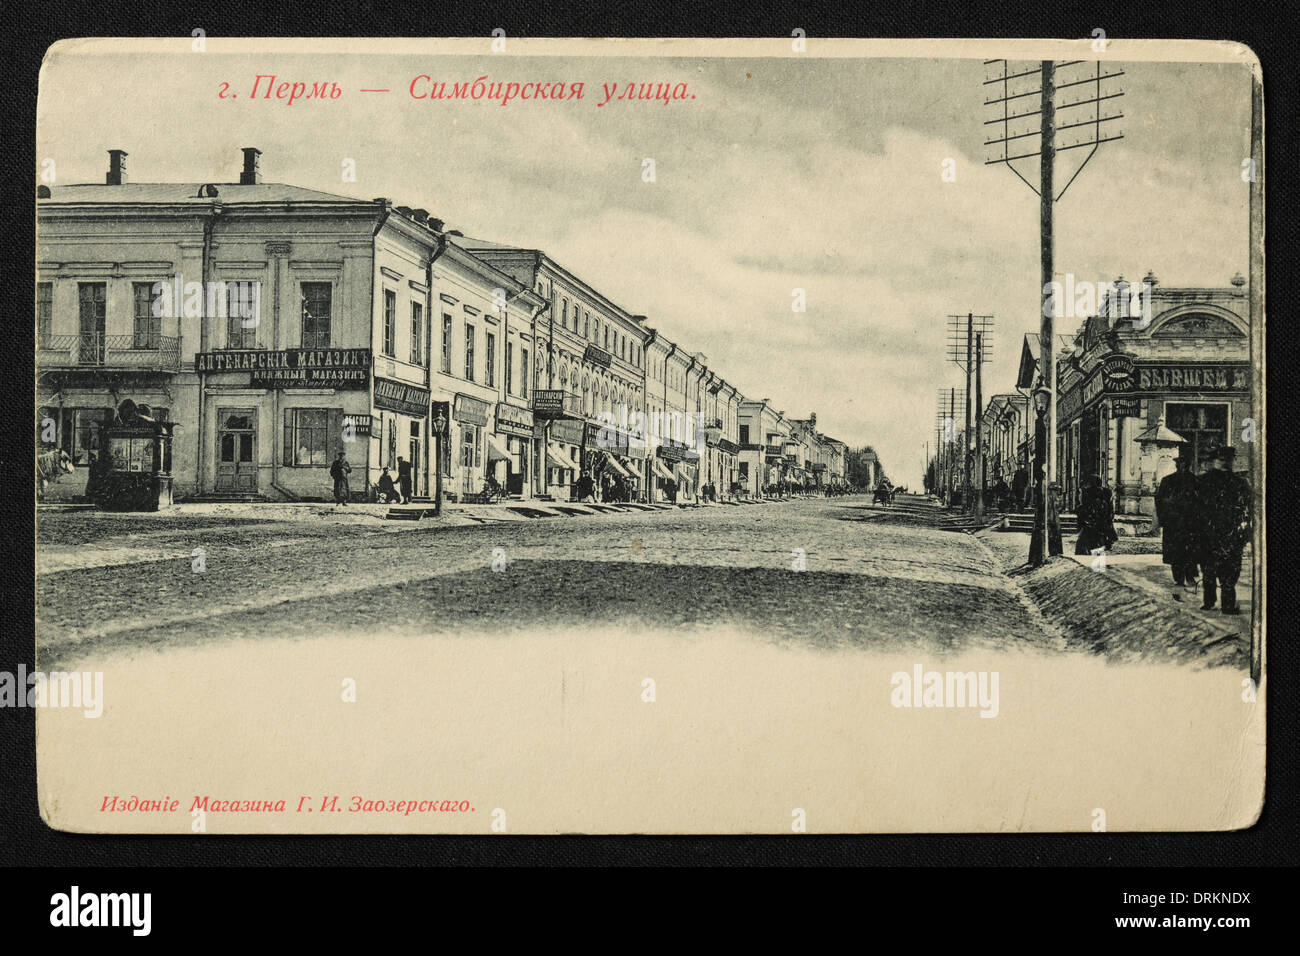 Simbirskaya Street in the city of Perm, Russian Empire. Black and white vintage photograph by an unknown photographer dated from the beginning of the 20th century issued in the Russian vintage postcard published by G.I. Zaozersky. Text in Russian: Perm. Simbirskaya Street. Courtesy of the Azoor Postcard Collection. Stock Photo